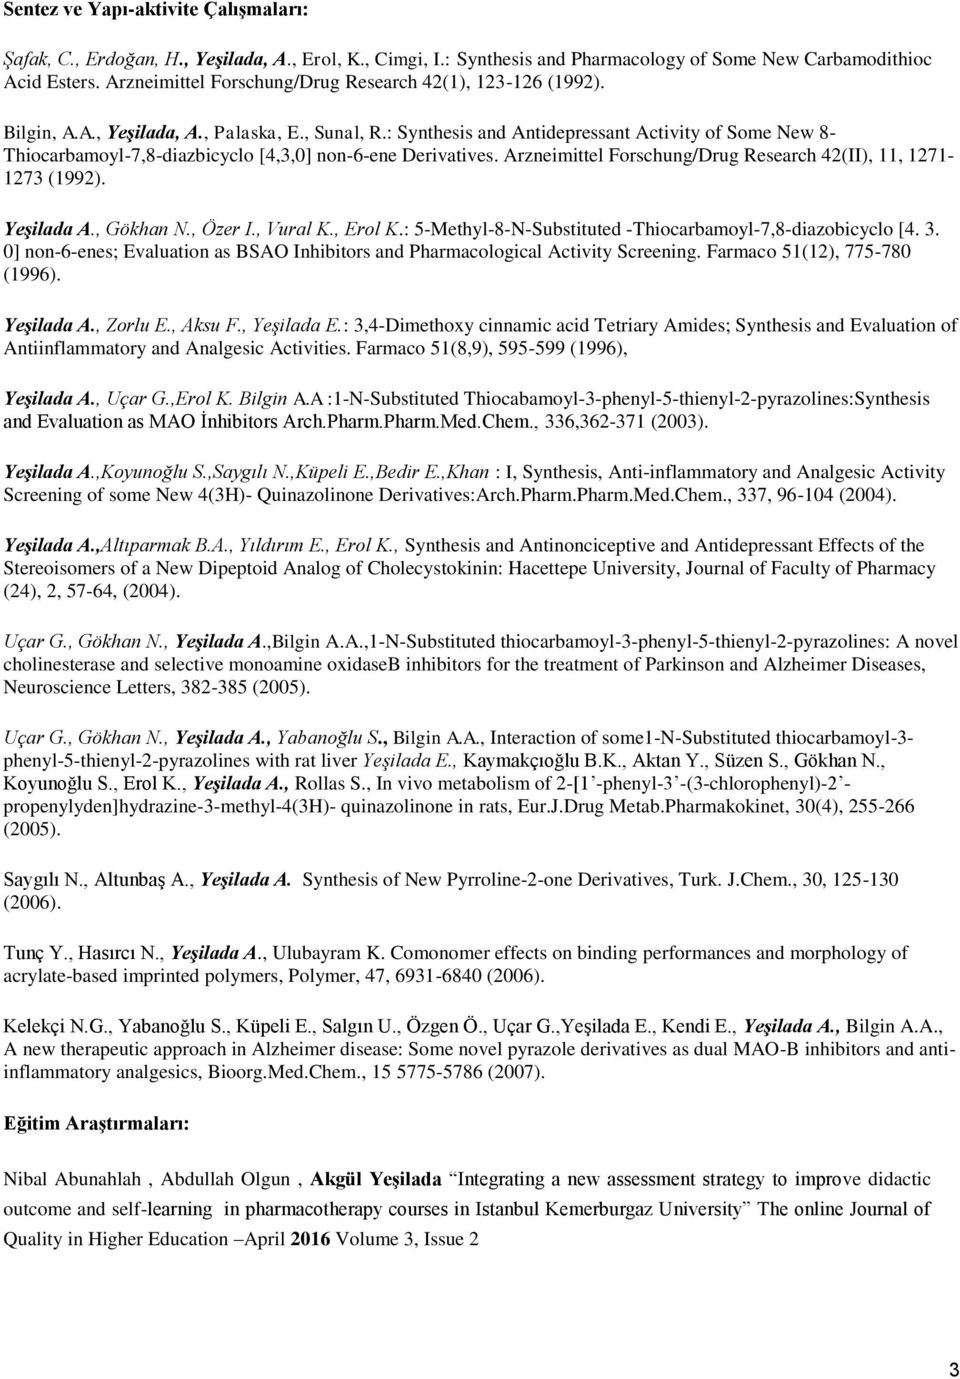 : Synthesis and Antidepressant Activity of Some New 8- Thiocarbamoyl-7,8-diazbicyclo [4,3,0] non-6-ene Derivatives. Arzneimittel Forschung/Drug Research 42(II), 11, 1271-1273 (1992). Yeşilada A.